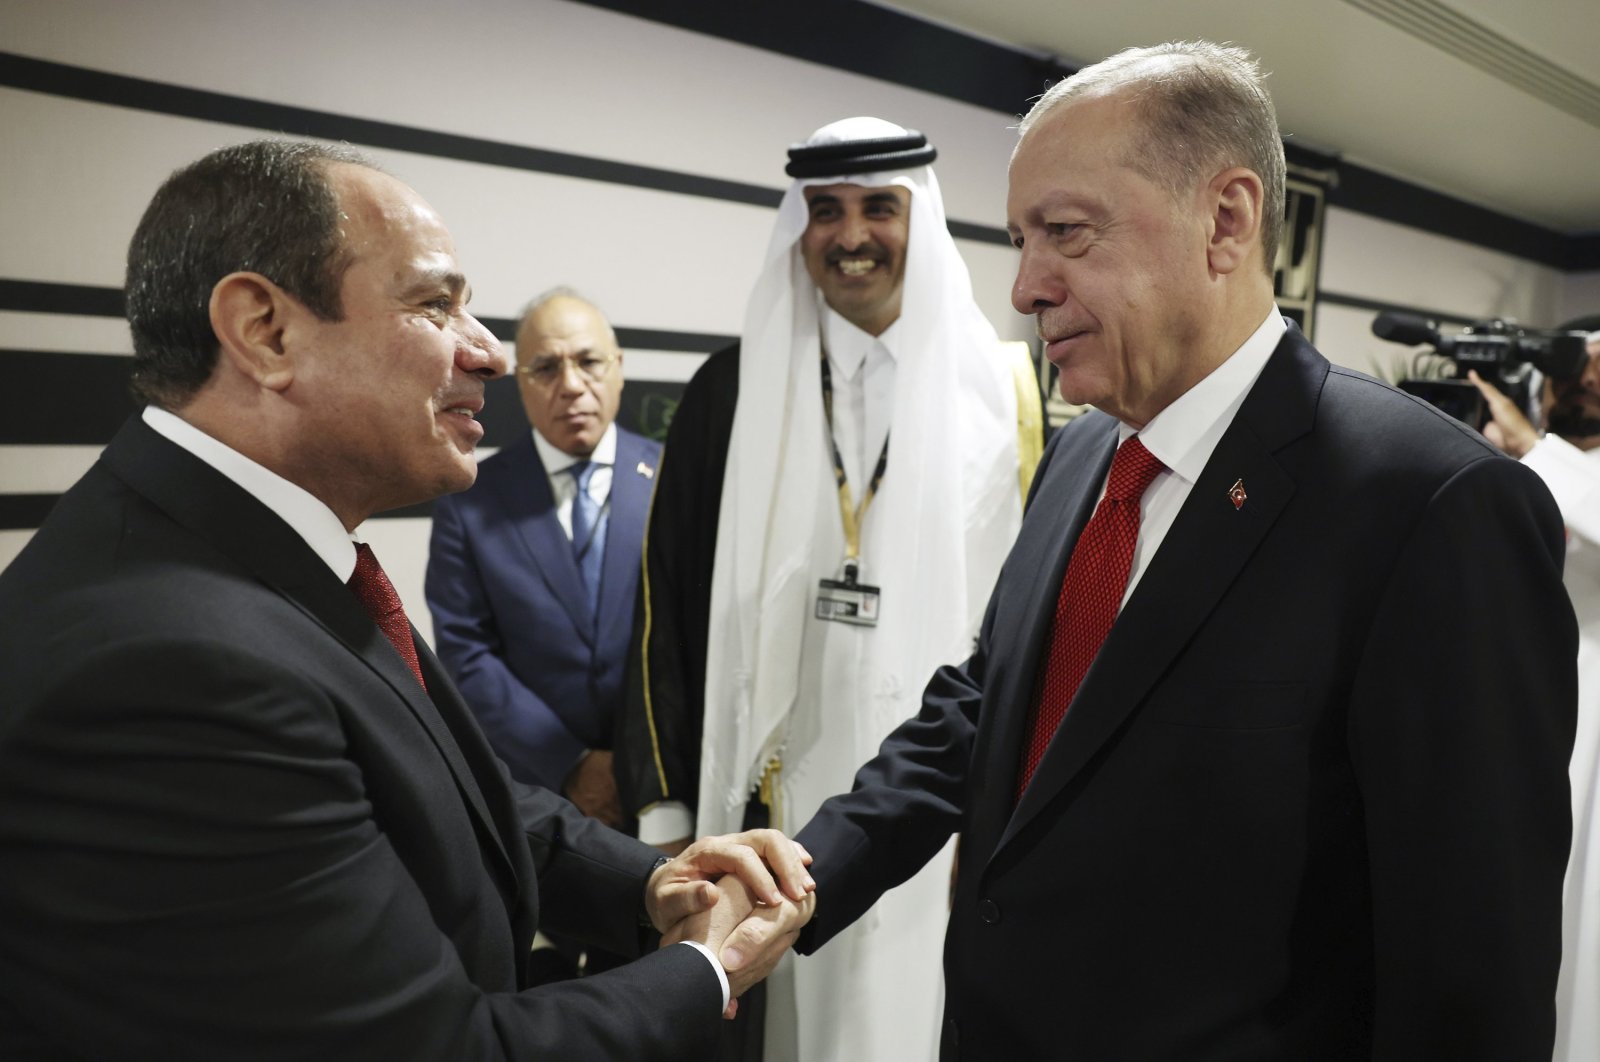 President Recep Tayyip Erdoğan (R) shakes hands with Egyptian President Abdel-Fattah el-Sissi during the opening ceremony of the 2022 World Cup in Doha, Qatar, Nov. 20, 2022. (AP Photo)